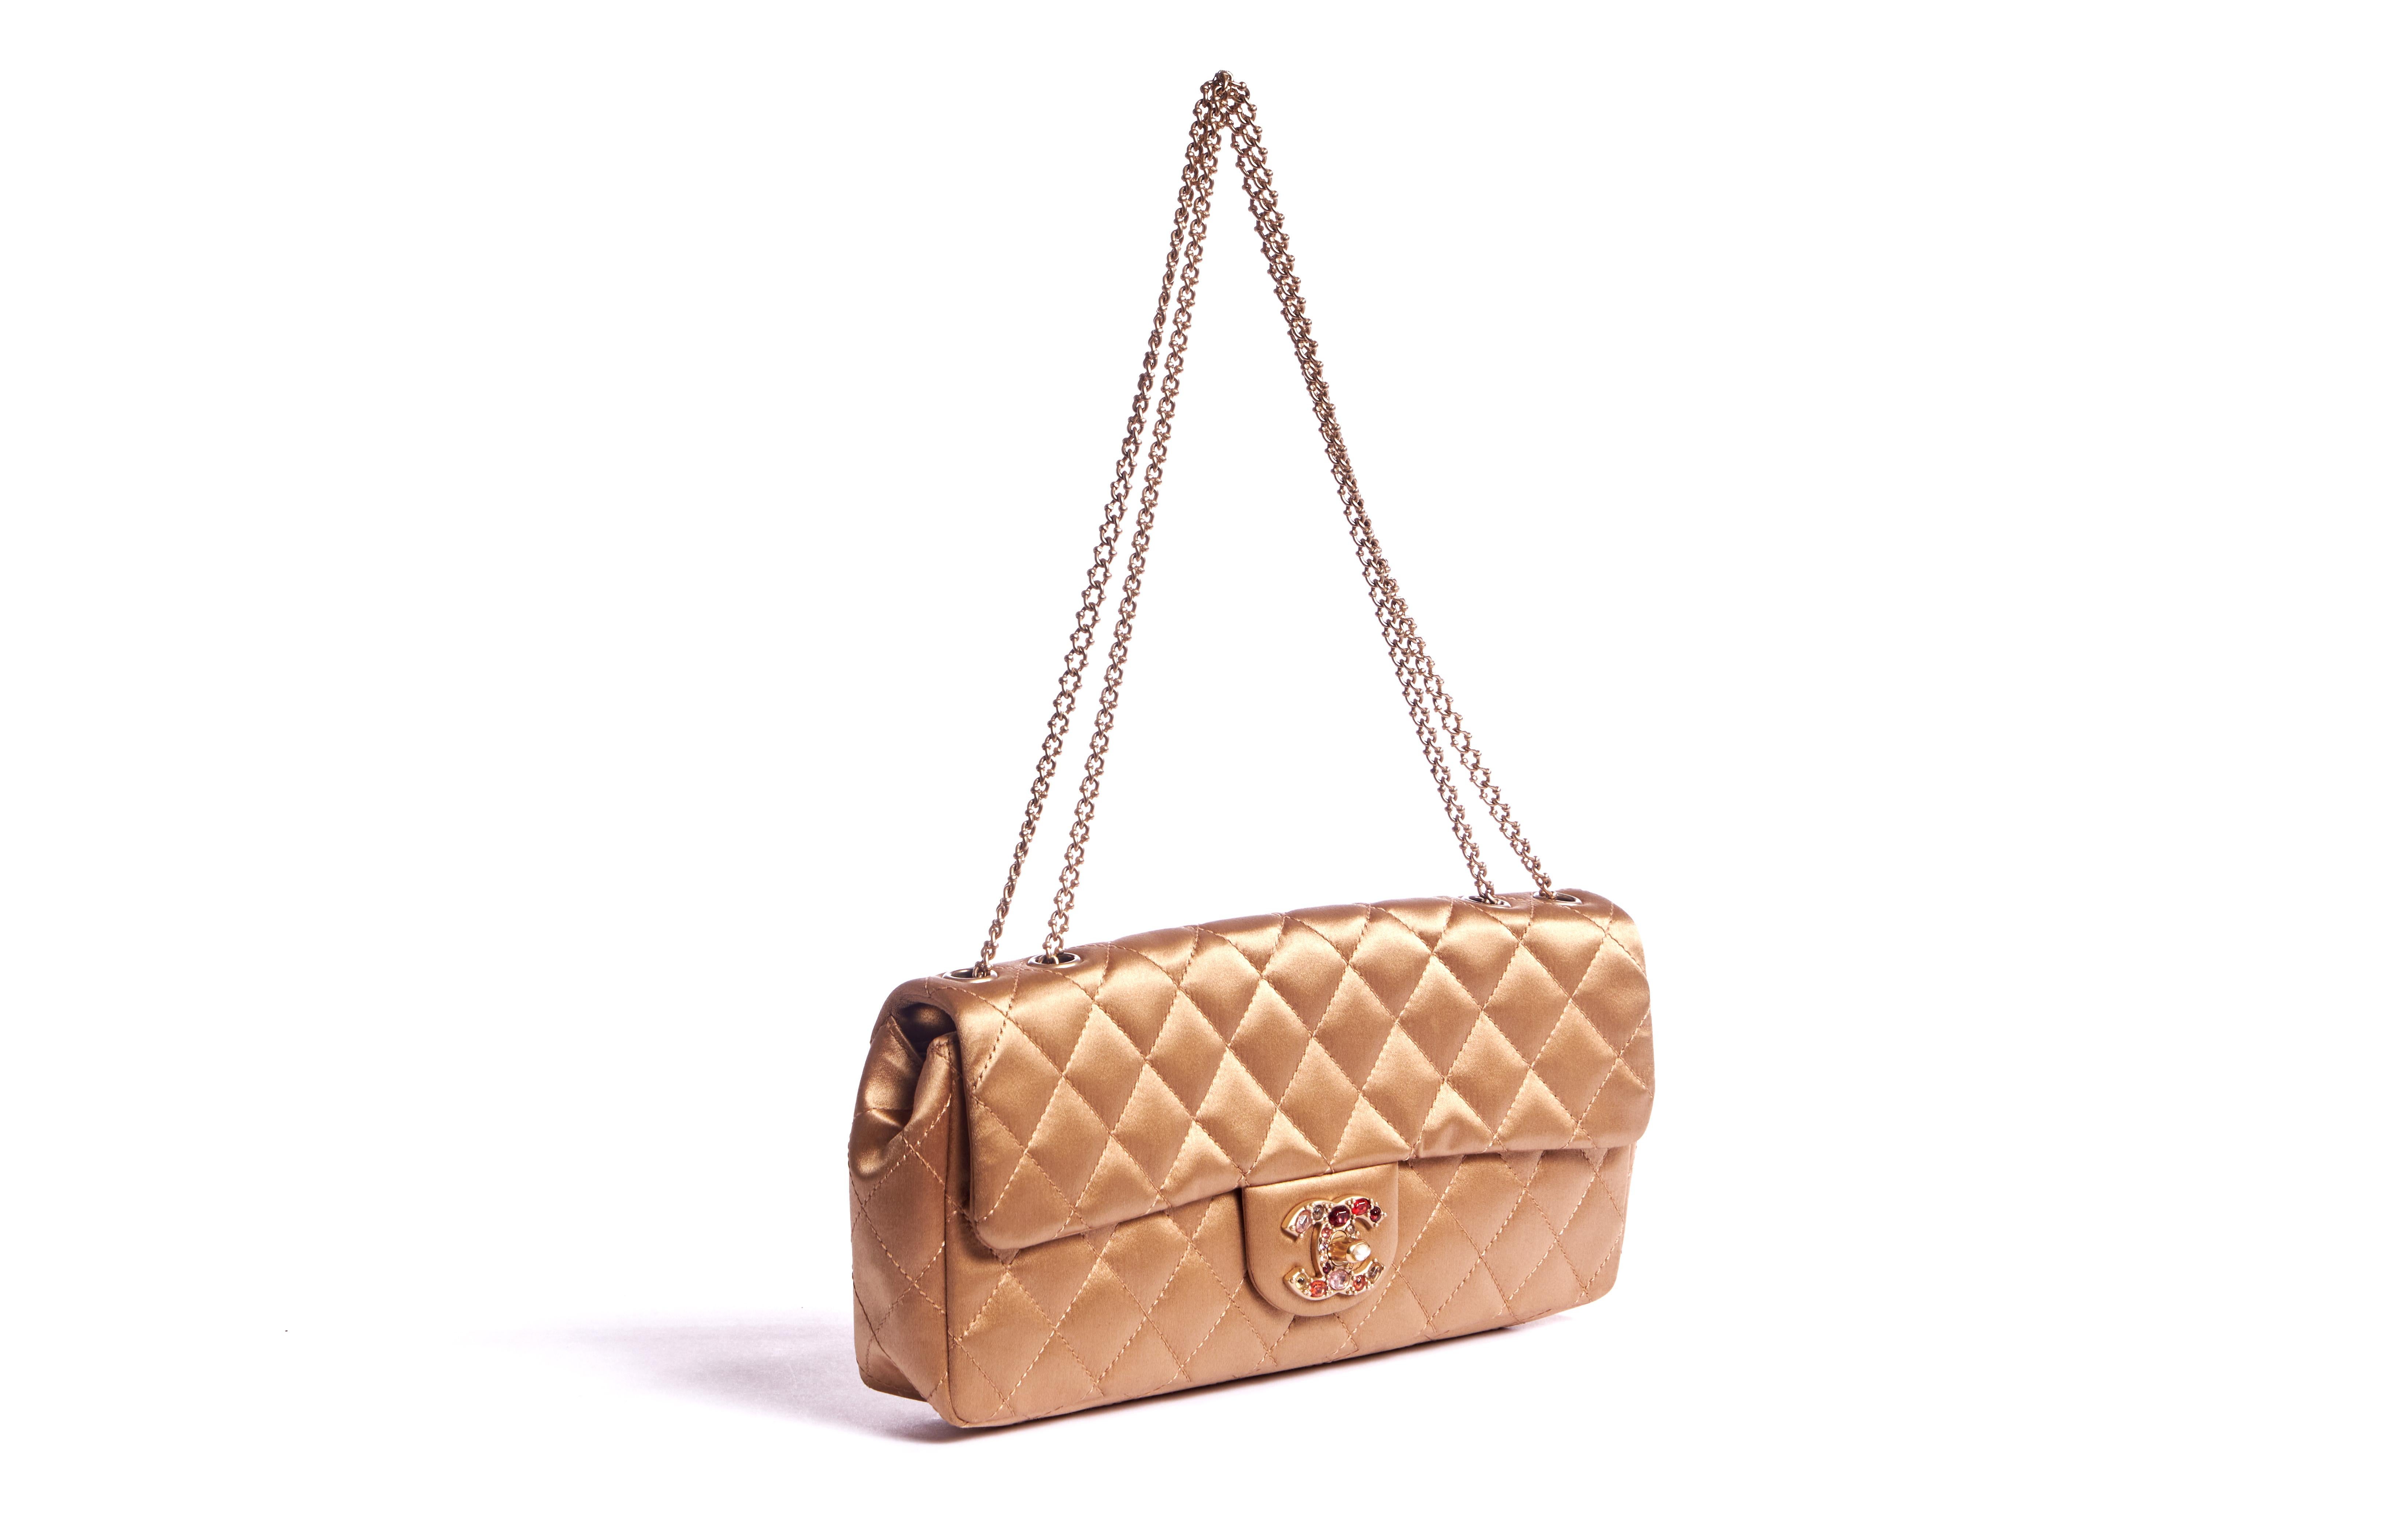 Chanel gold silk evening bag with jewel clasp. Shoulder drop 9